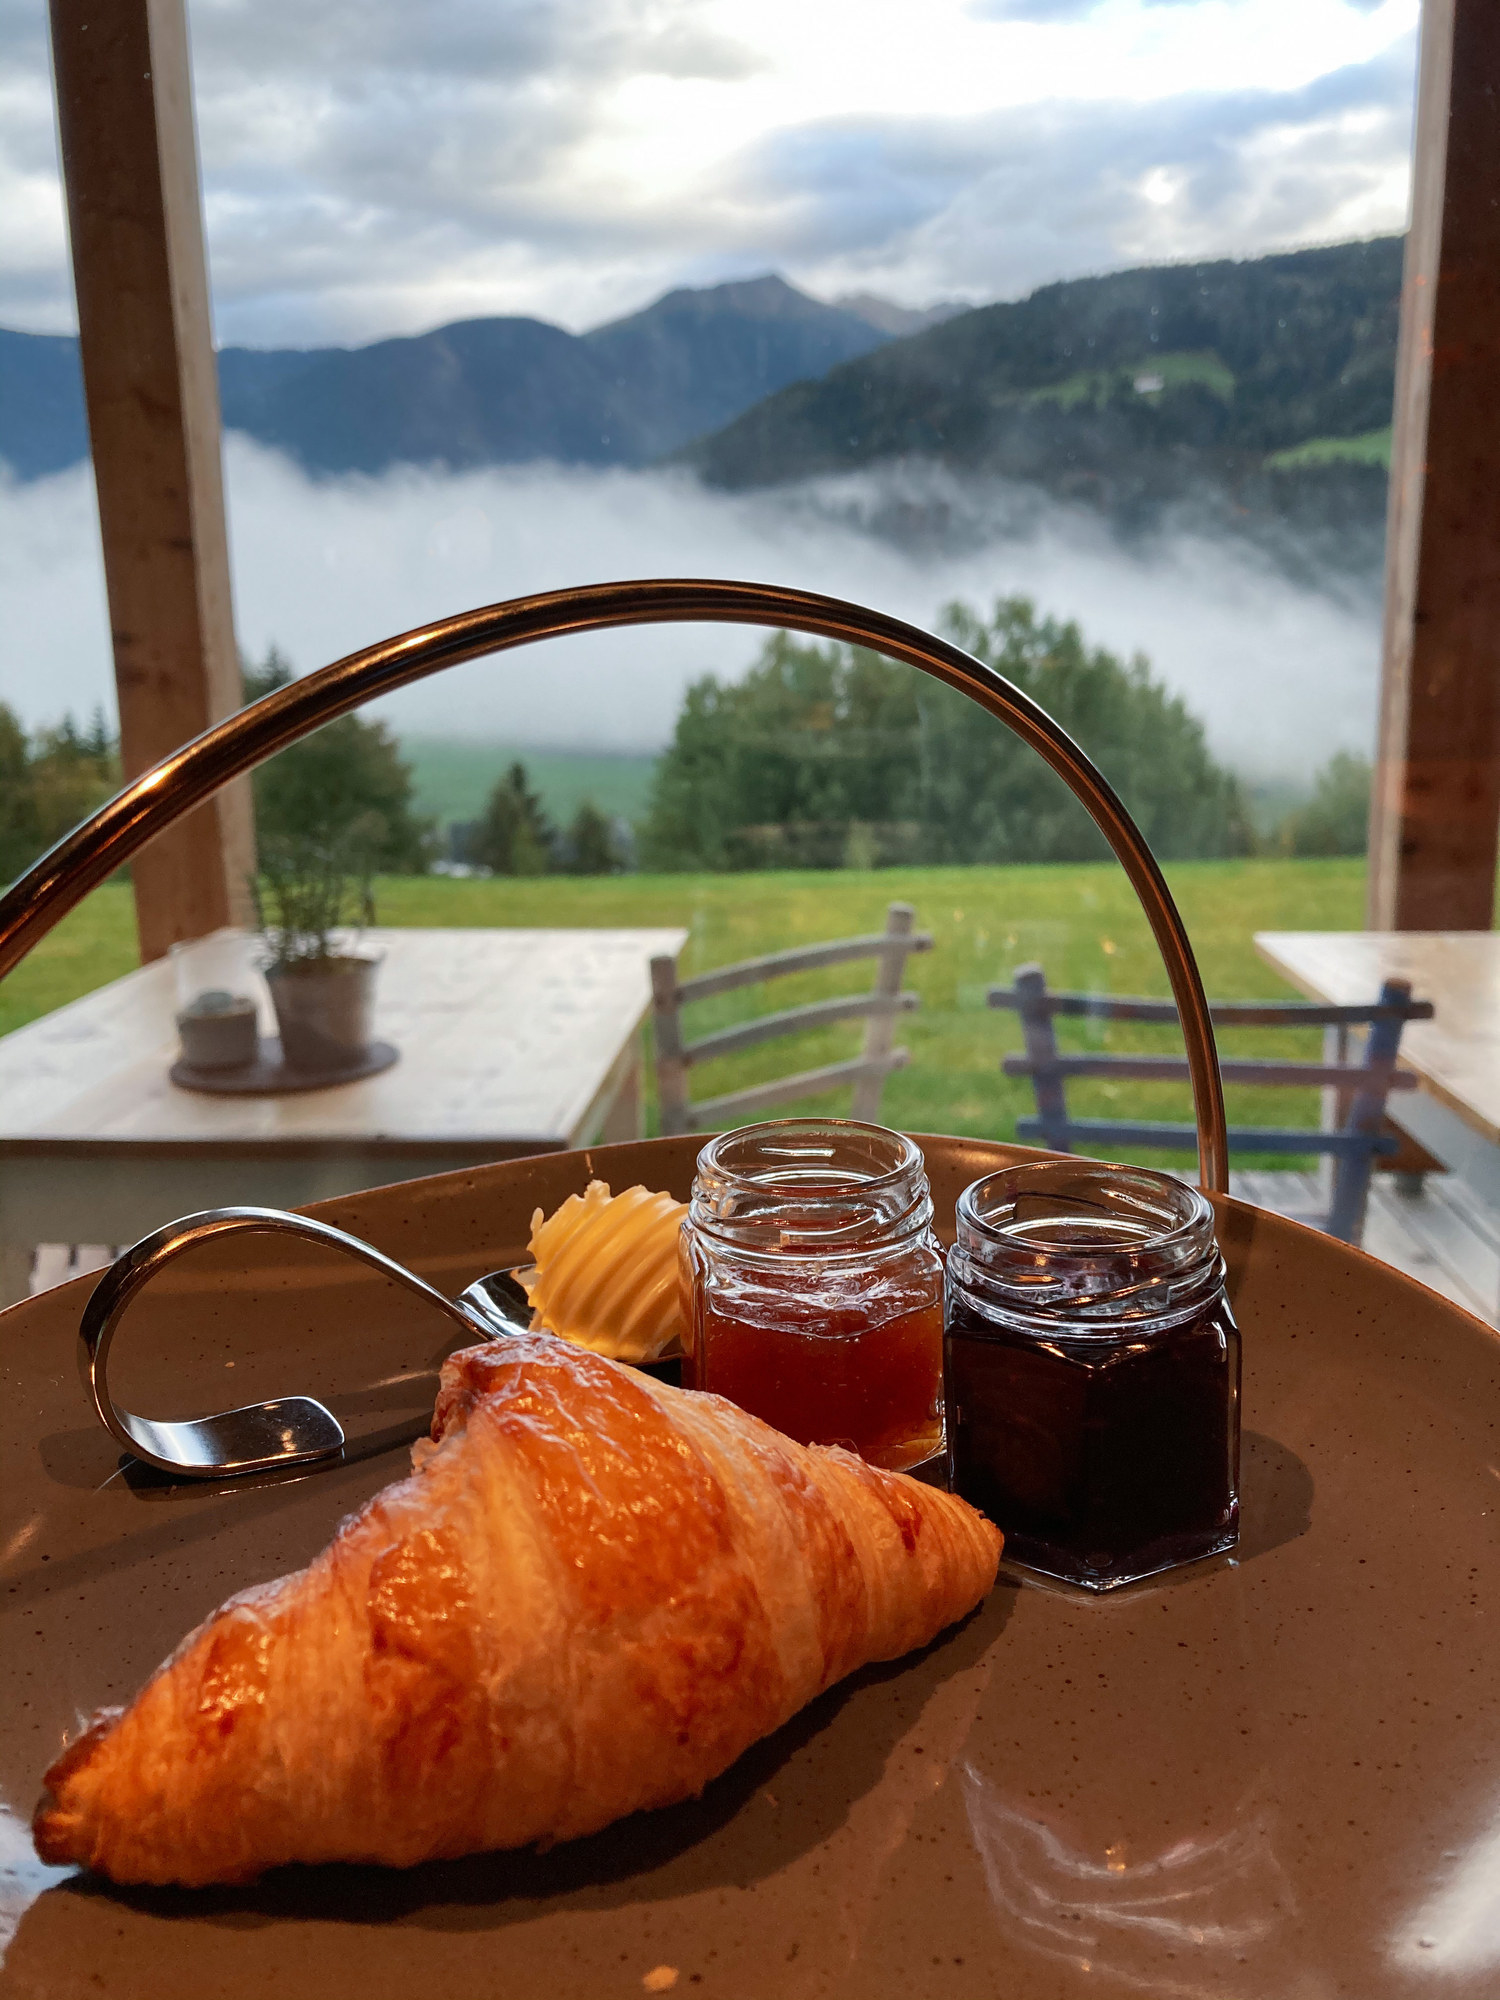 Croissants, butter, and jam on a table with a view of mountains